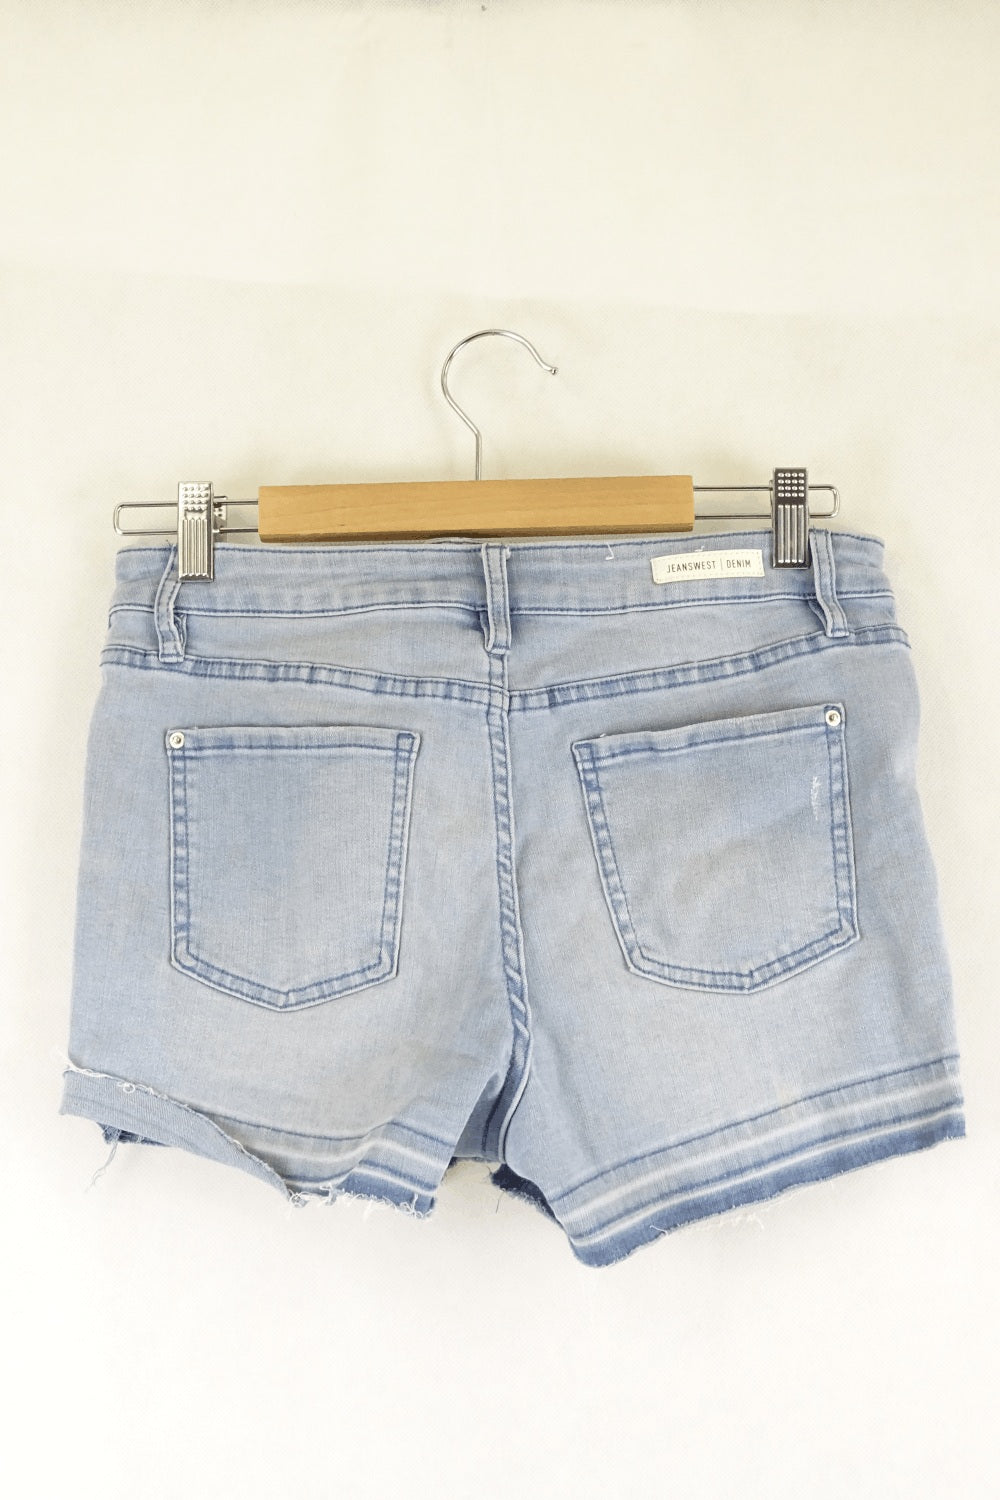 Jeanswest Shorts 10